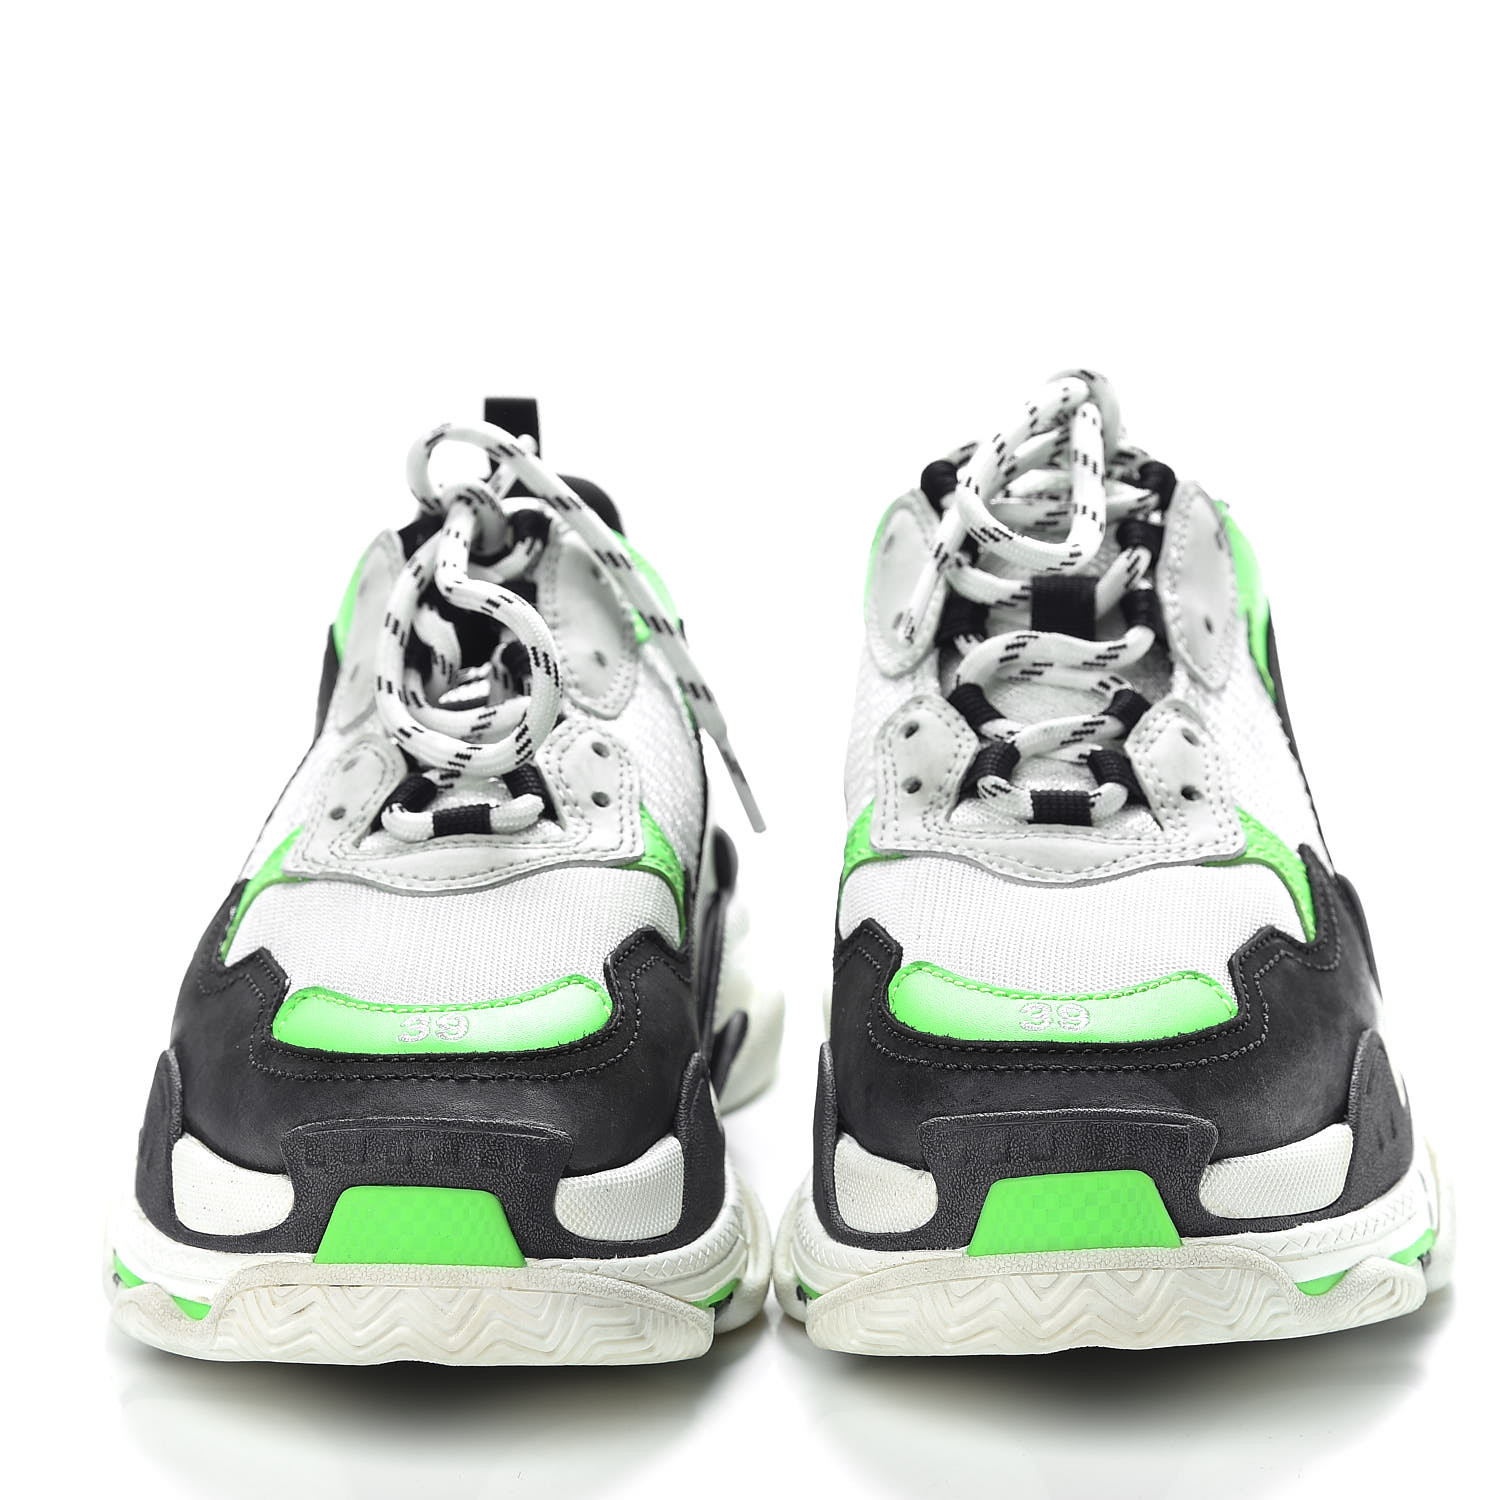 Balenciaga Triple S Sneakers are now made in YouTube